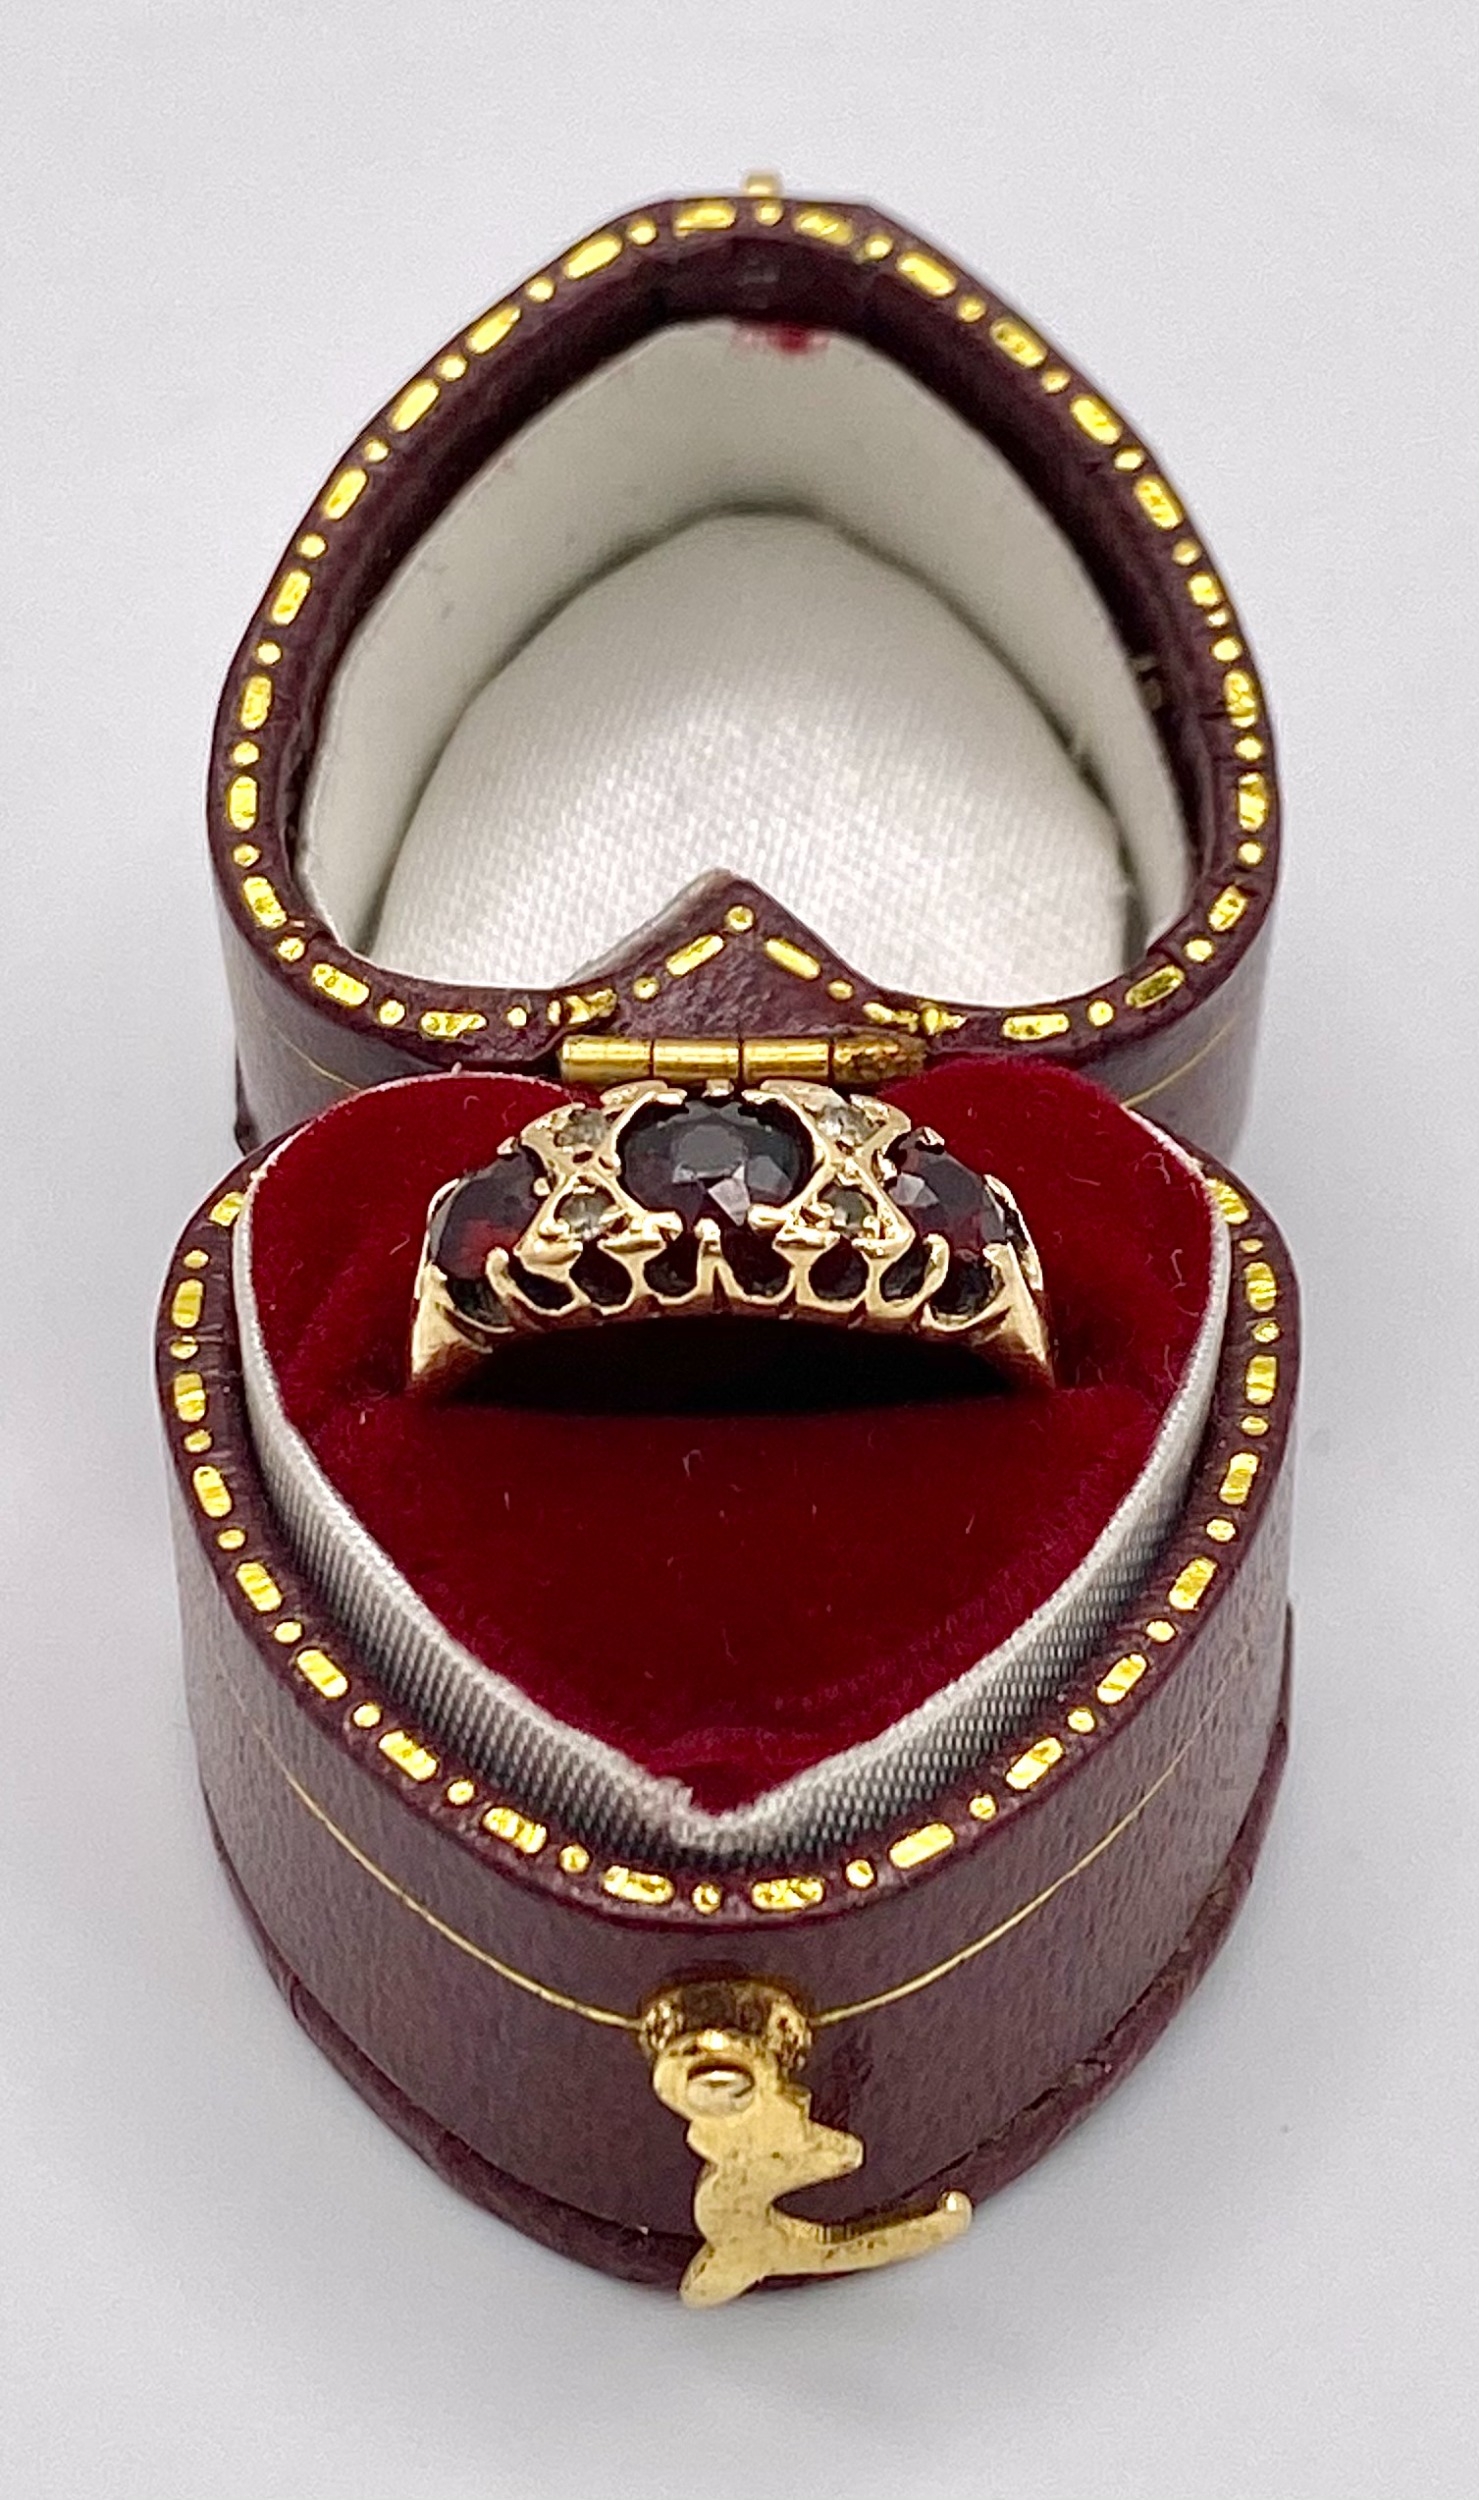 A 9K Yellow Gold, Garnet and Diamond Ring. Size K, 1.9g total weight. Comes in presentation case. - Image 3 of 7